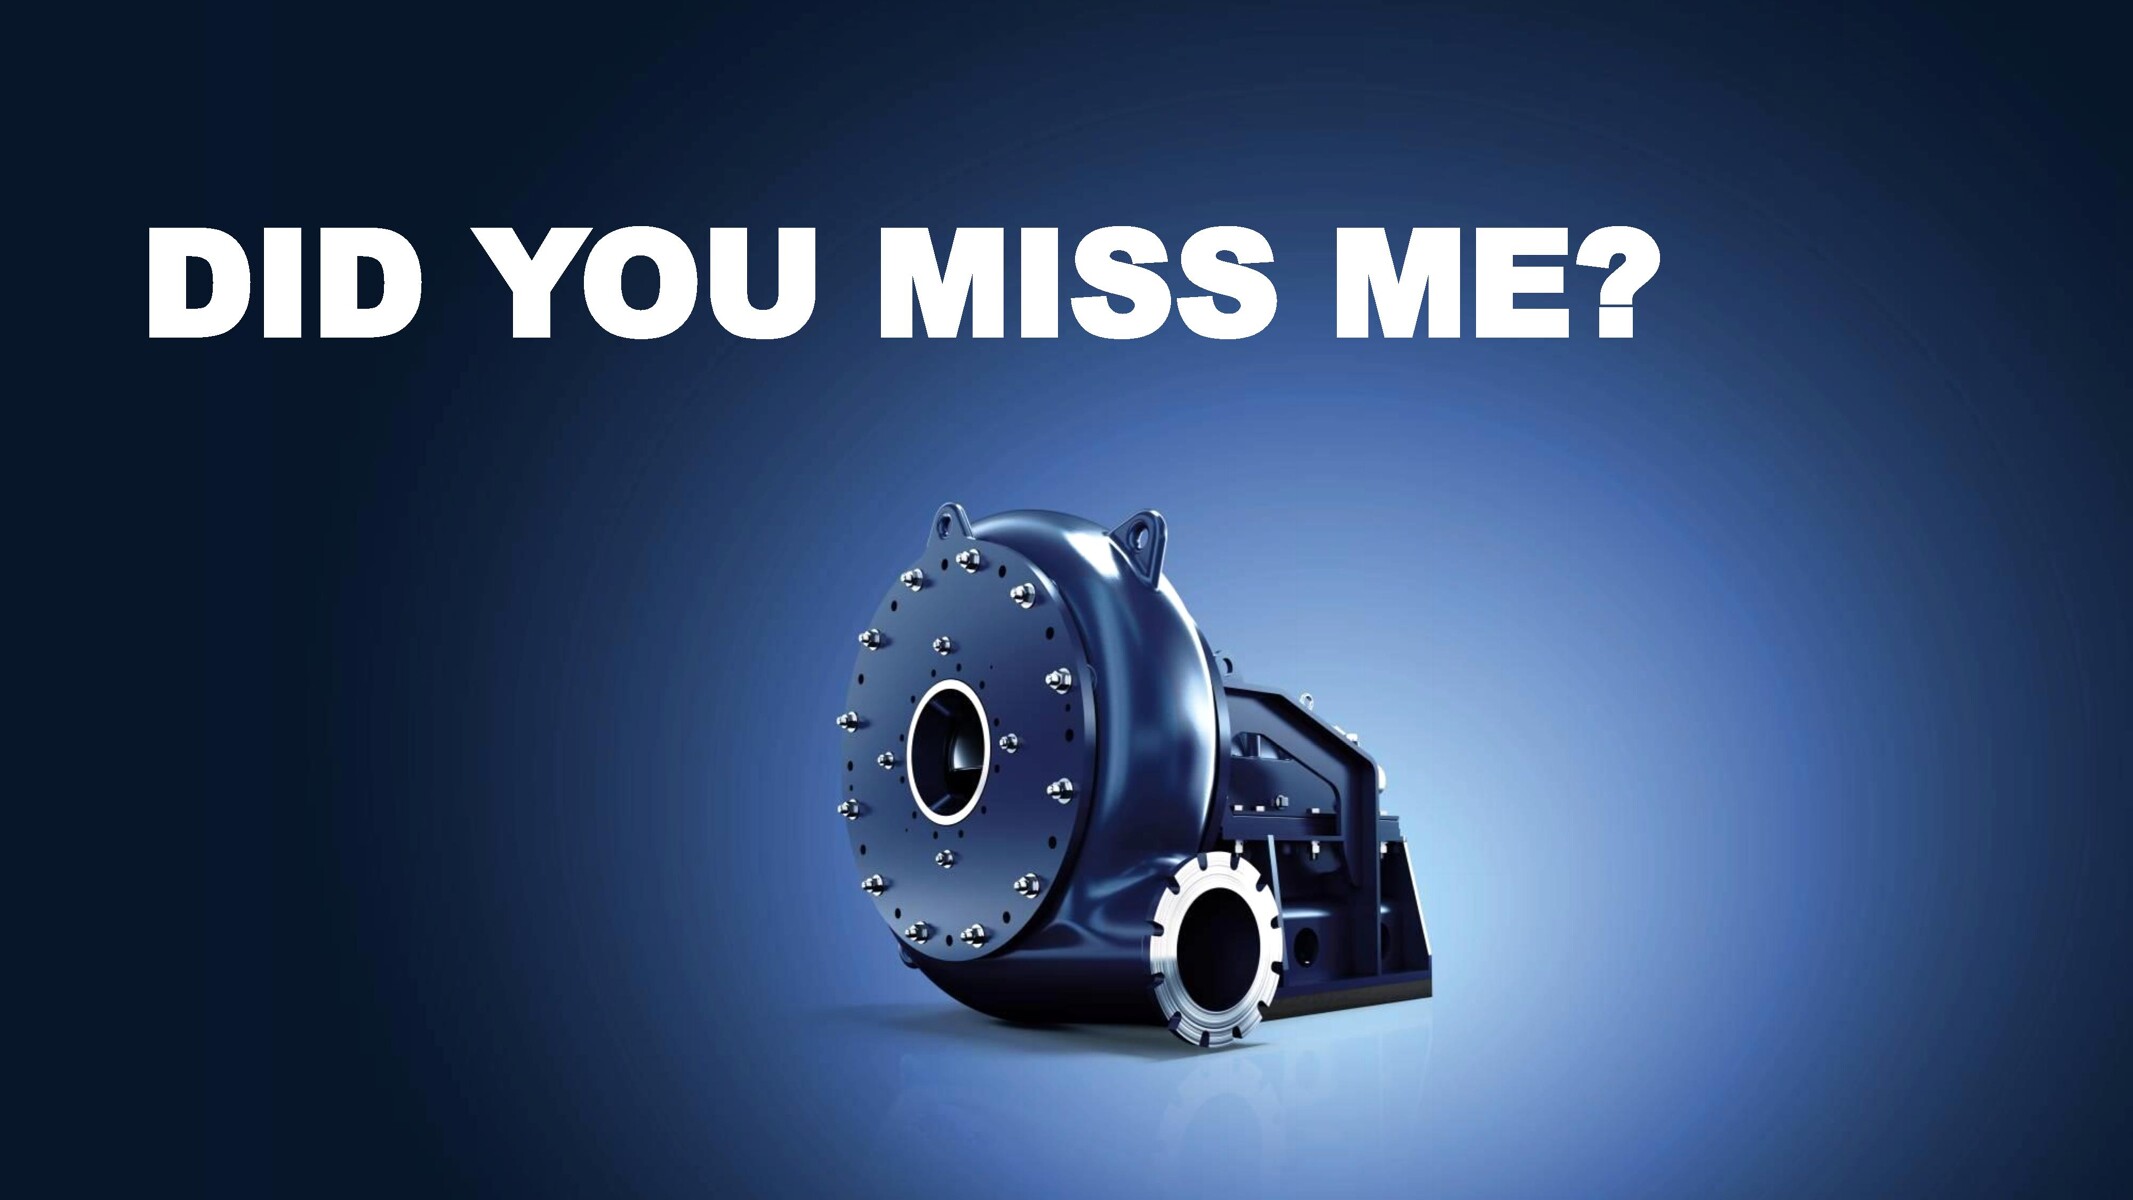 GIW mining pumps are available from KSB Finland